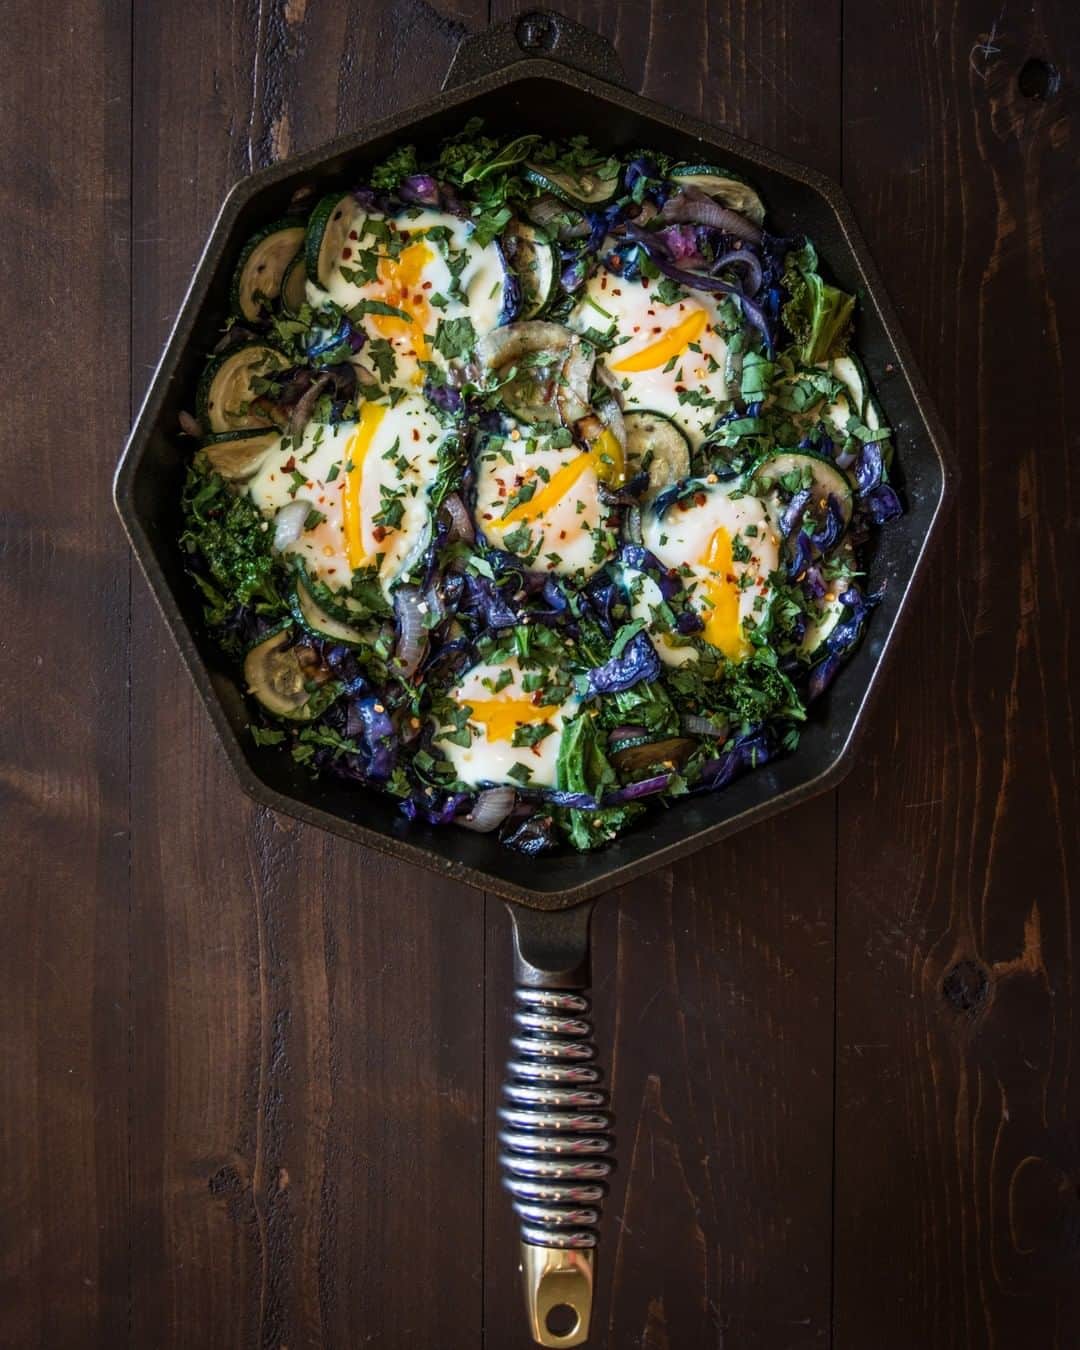 Flavorgod Seasoningsさんのインスタグラム写真 - (Flavorgod SeasoningsInstagram)「One Dish Breakfast Skillet 🍳⠀ .⠀ Ingredients:⠀ 1 zucchini, sliced⠀ 1/2 small purple cabbage, sliced⠀ 1 bunch kale, chopped⠀ 1 small onion, sliced⠀ 6 eggs, room temp if possible⠀ 1/4 tsp @flavorgod Garlic Herb Salt⠀ 1-2 tbsp cooking fat of choice⠀ Garnish:⠀ red pepper flakes⠀ cilantro, chopped⠀ .⠀ Directions:⠀ Preheat oven to 350F. Heat a large skillet over med high heat. When hot, add cooking fat (I used pork lard for extra flavor!). Add onions and cabbage first. Sauté for about 5 minutes, then add zucchini. Cook another 5 minutes or so, then add kale and garlic herb salt. Stir veggies and cook another 5 minutes. Using the back of a spoon, create 6 little wells for the eggs. Crack an egg in each well, then place skillet in oven and cook for about 7-8 minutes or until egg whites are set and turn opaque. Season with more garlic herb salt if desired. I always top mine with red pepper flakes and chopped cilantro. Serve as is, or with a side of your favorite breakfast sausage, bacon, or ham. - Pan from @finexcookware -⠀ -⠀ #food #foodie #flavorgod #seasonings #glutenfree #keto #paleo #vegan #kosher #breakfast #lunch #dinner #yummy #delicious #foodporn #mealprep ⠀」5月30日 22時00分 - flavorgod